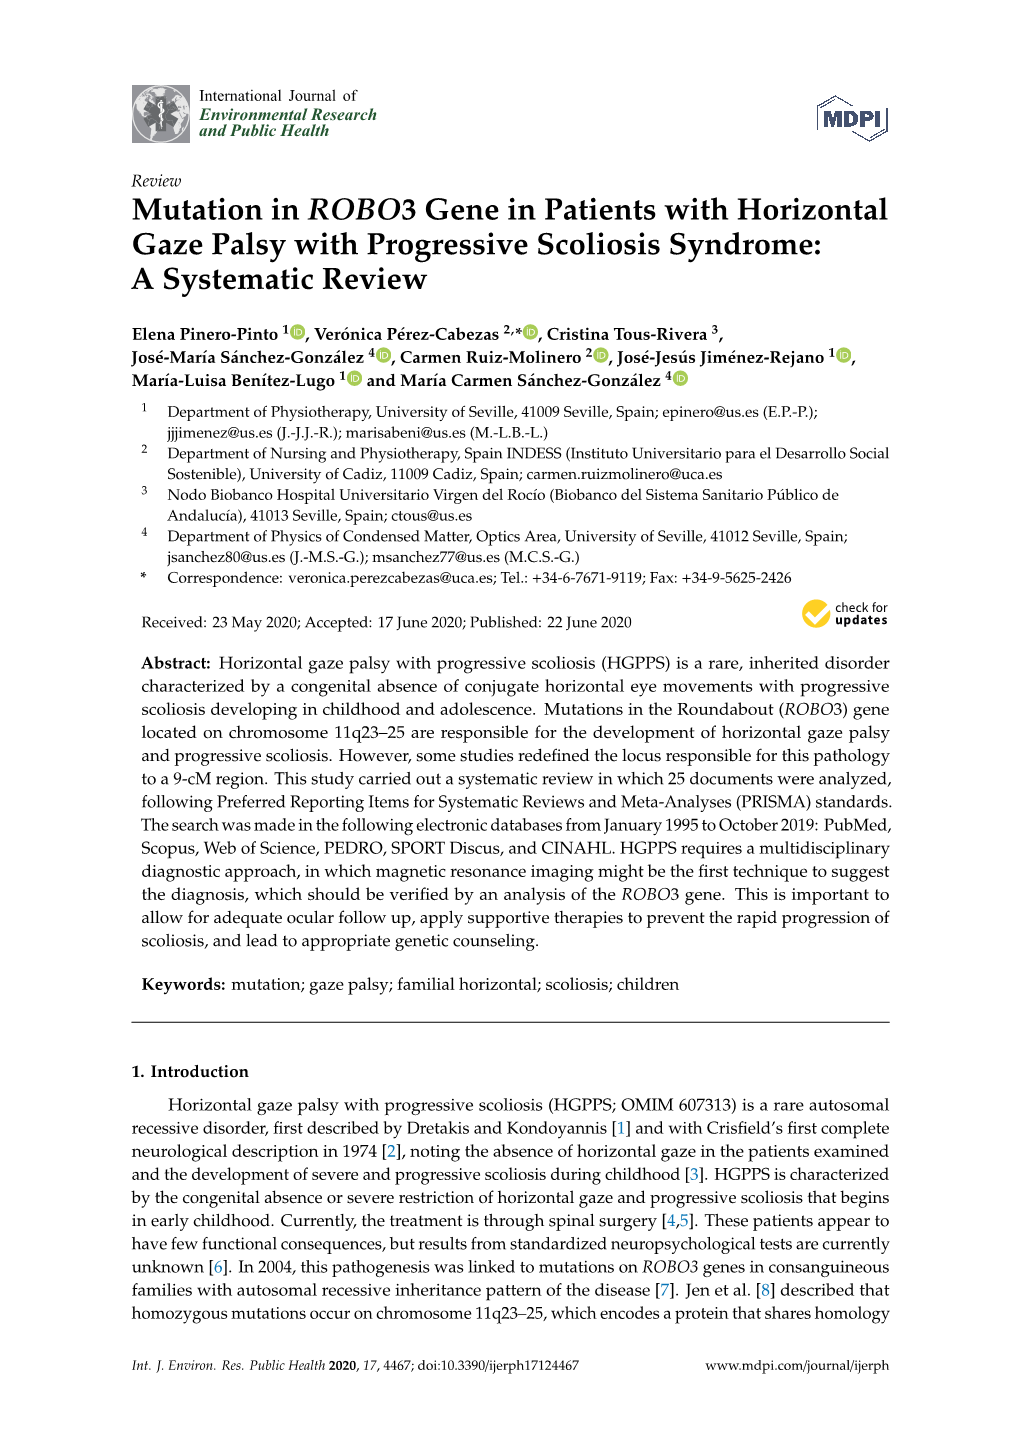 Mutation in ROBO3 Gene in Patients with Horizontal Gaze Palsy with Progressive Scoliosis Syndrome: a Systematic Review